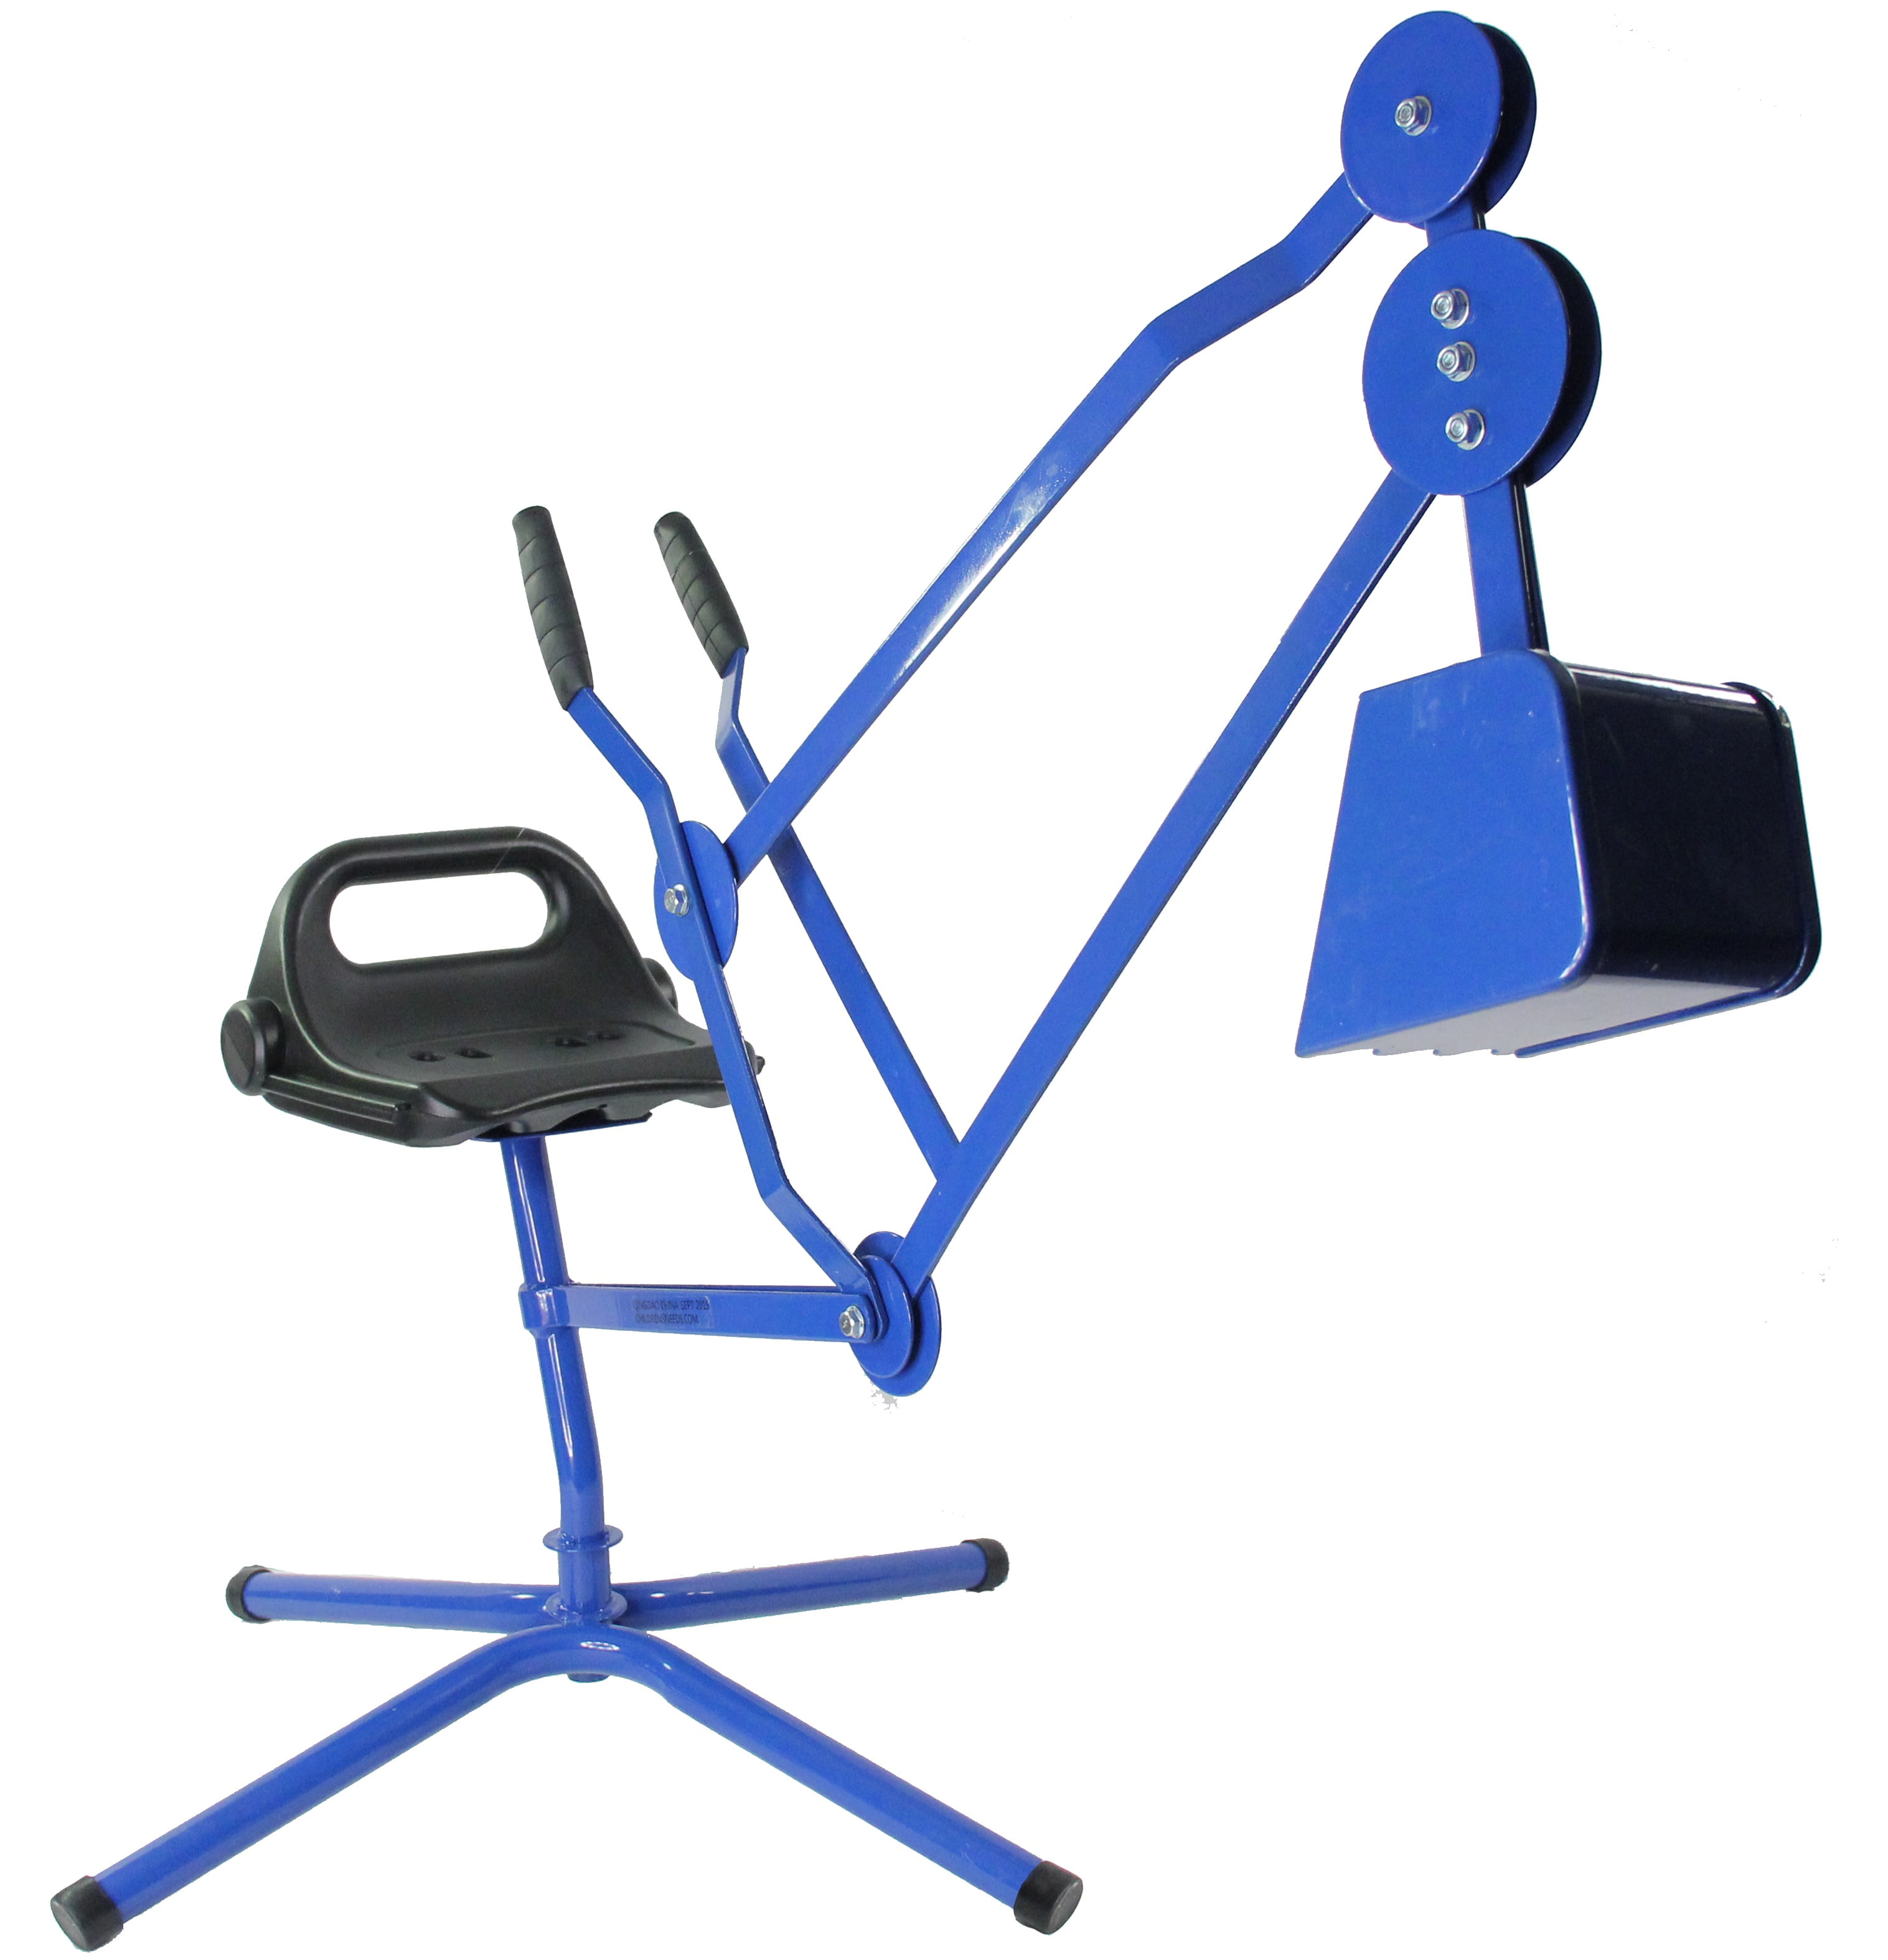 blue Sand Digger Toy Exavator with Telescoping Legs 